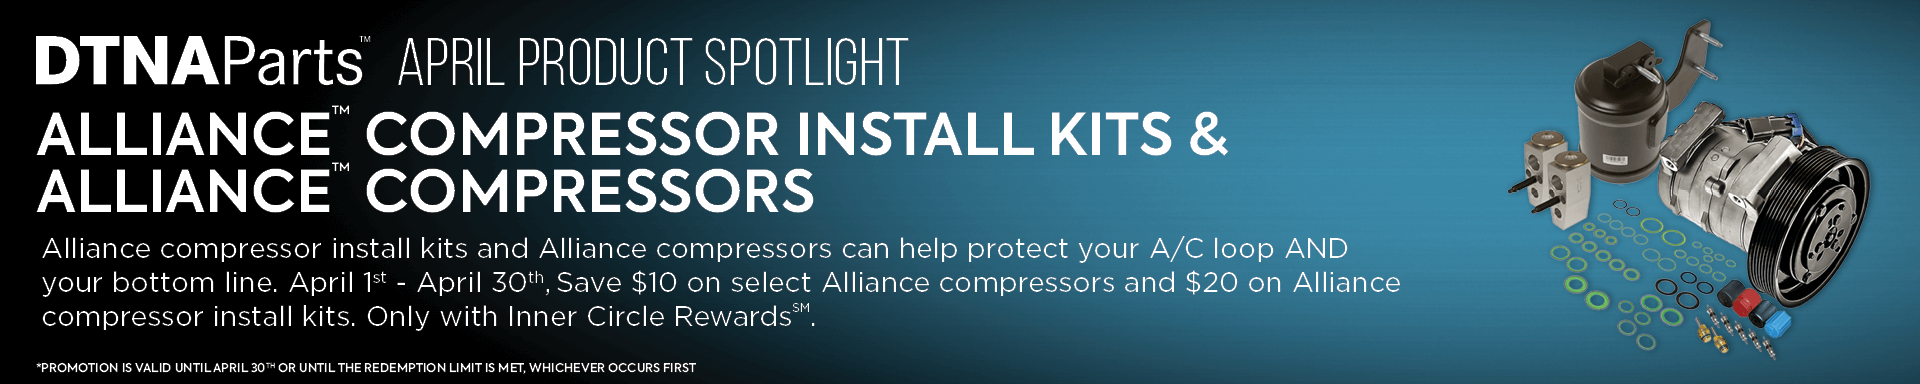 April Product Spotlight - Save $10 on select Alliance Compressors and $20 on Alliance compressor install kits April 1 - 30